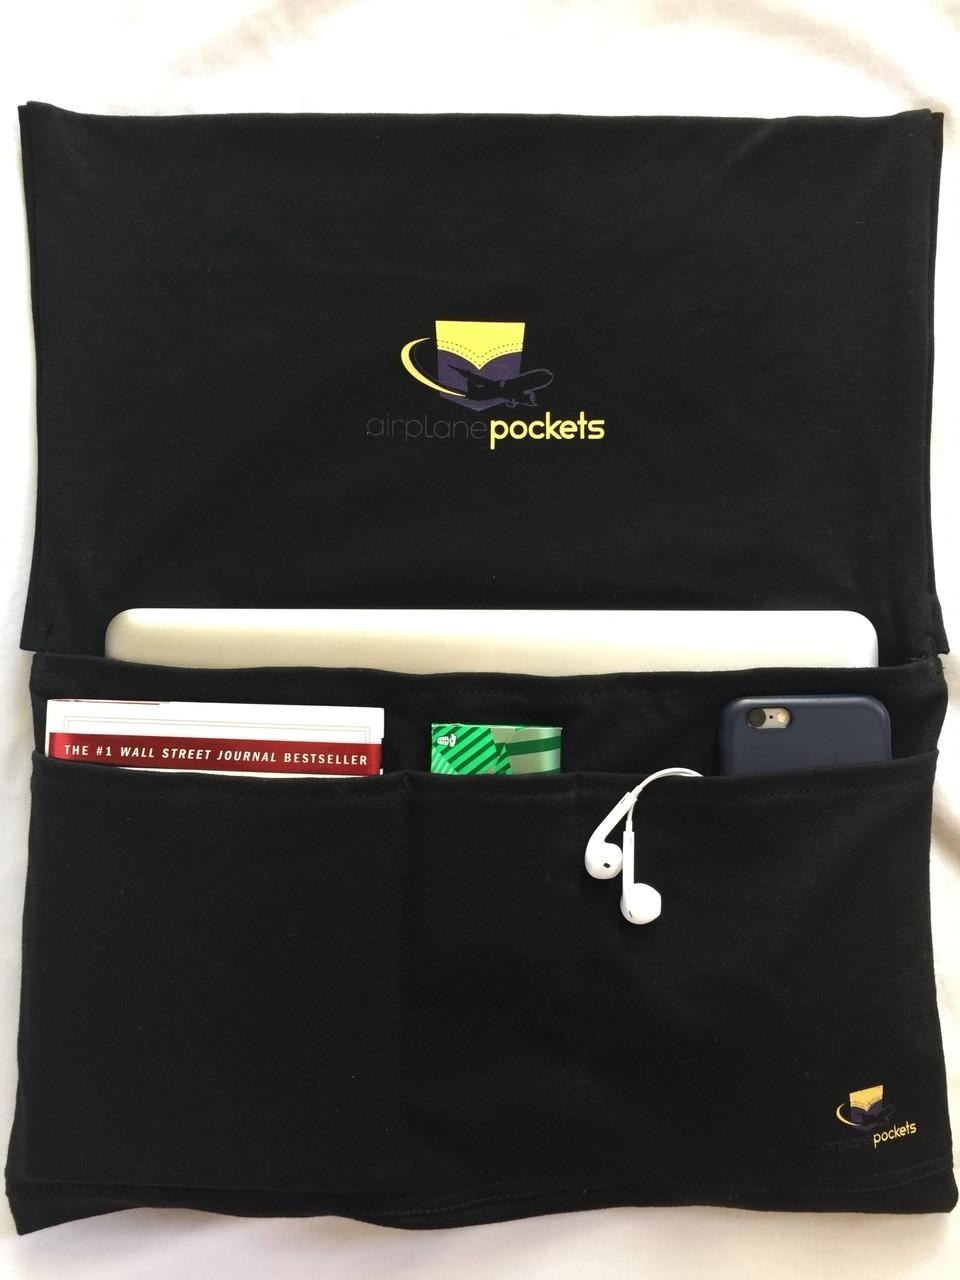 Reviewer&#x27;s photo of the Airplane Pockets seatback organizer in use, holding a tablet, a book, some gum, a phone, and some earbuds